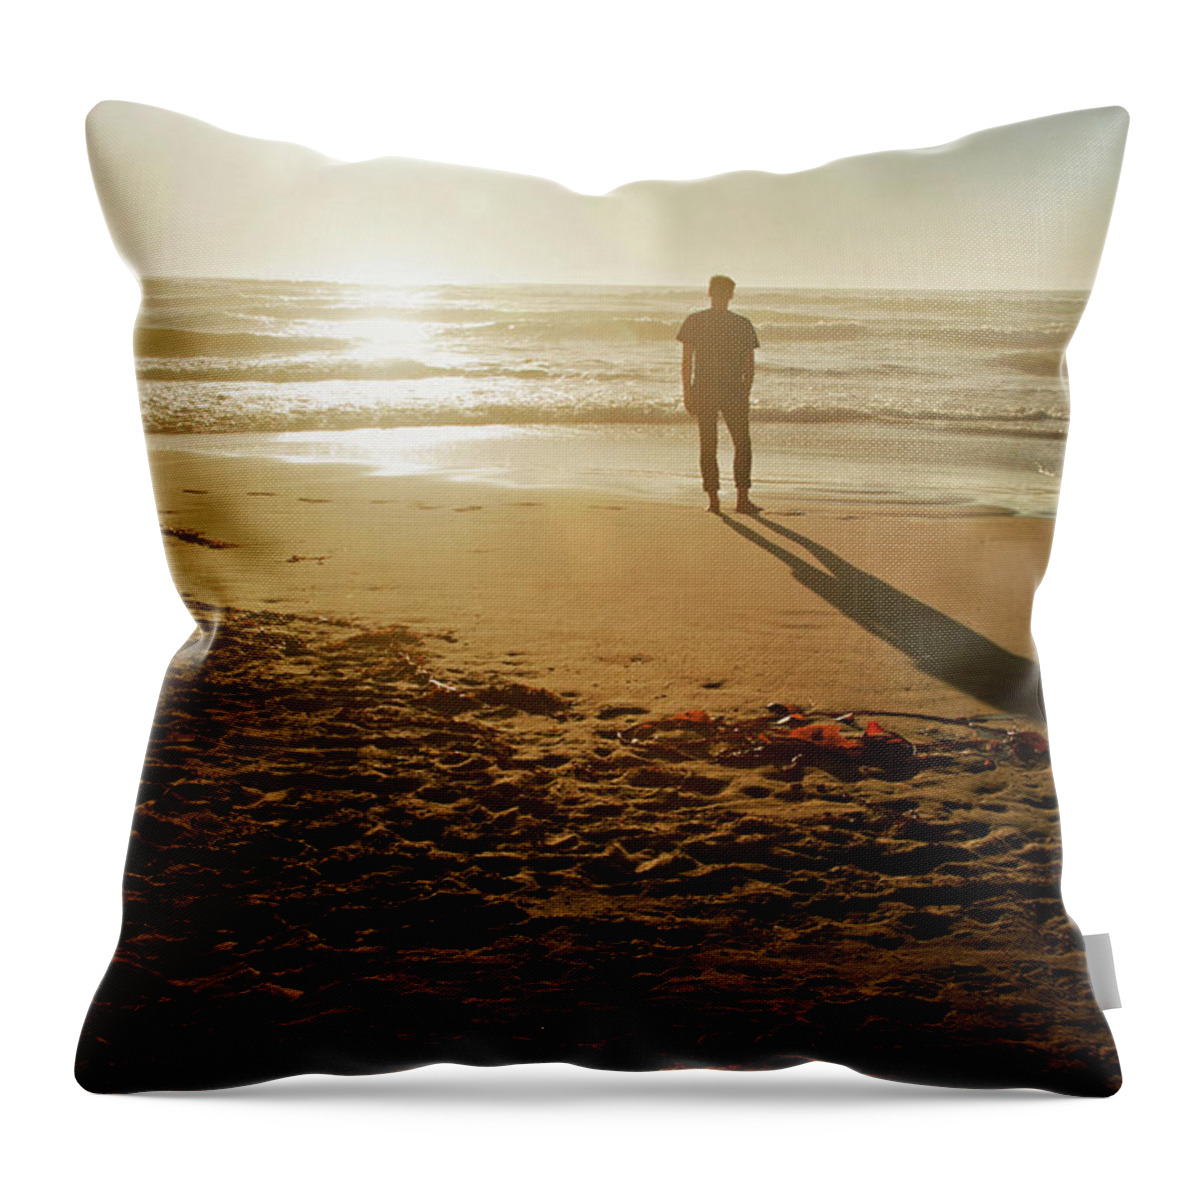 Tranquility Throw Pillow featuring the photograph A Silhouetted Figure Standing On A Beach by Tracy Packer Photography